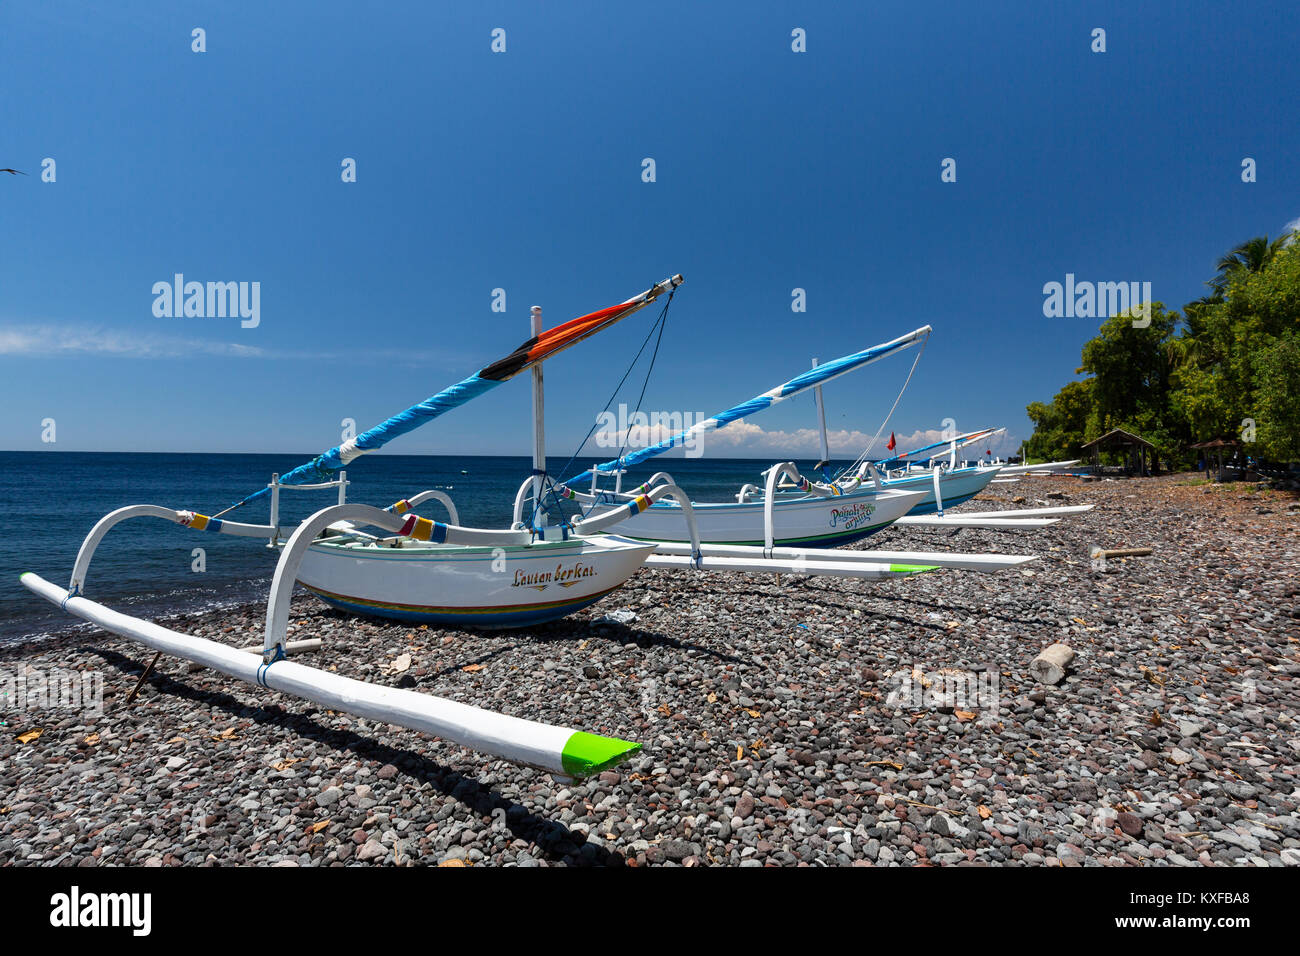 Jukong boats rest on the shoreline in Tulamben, Bali, Indonesia. Stock Photo